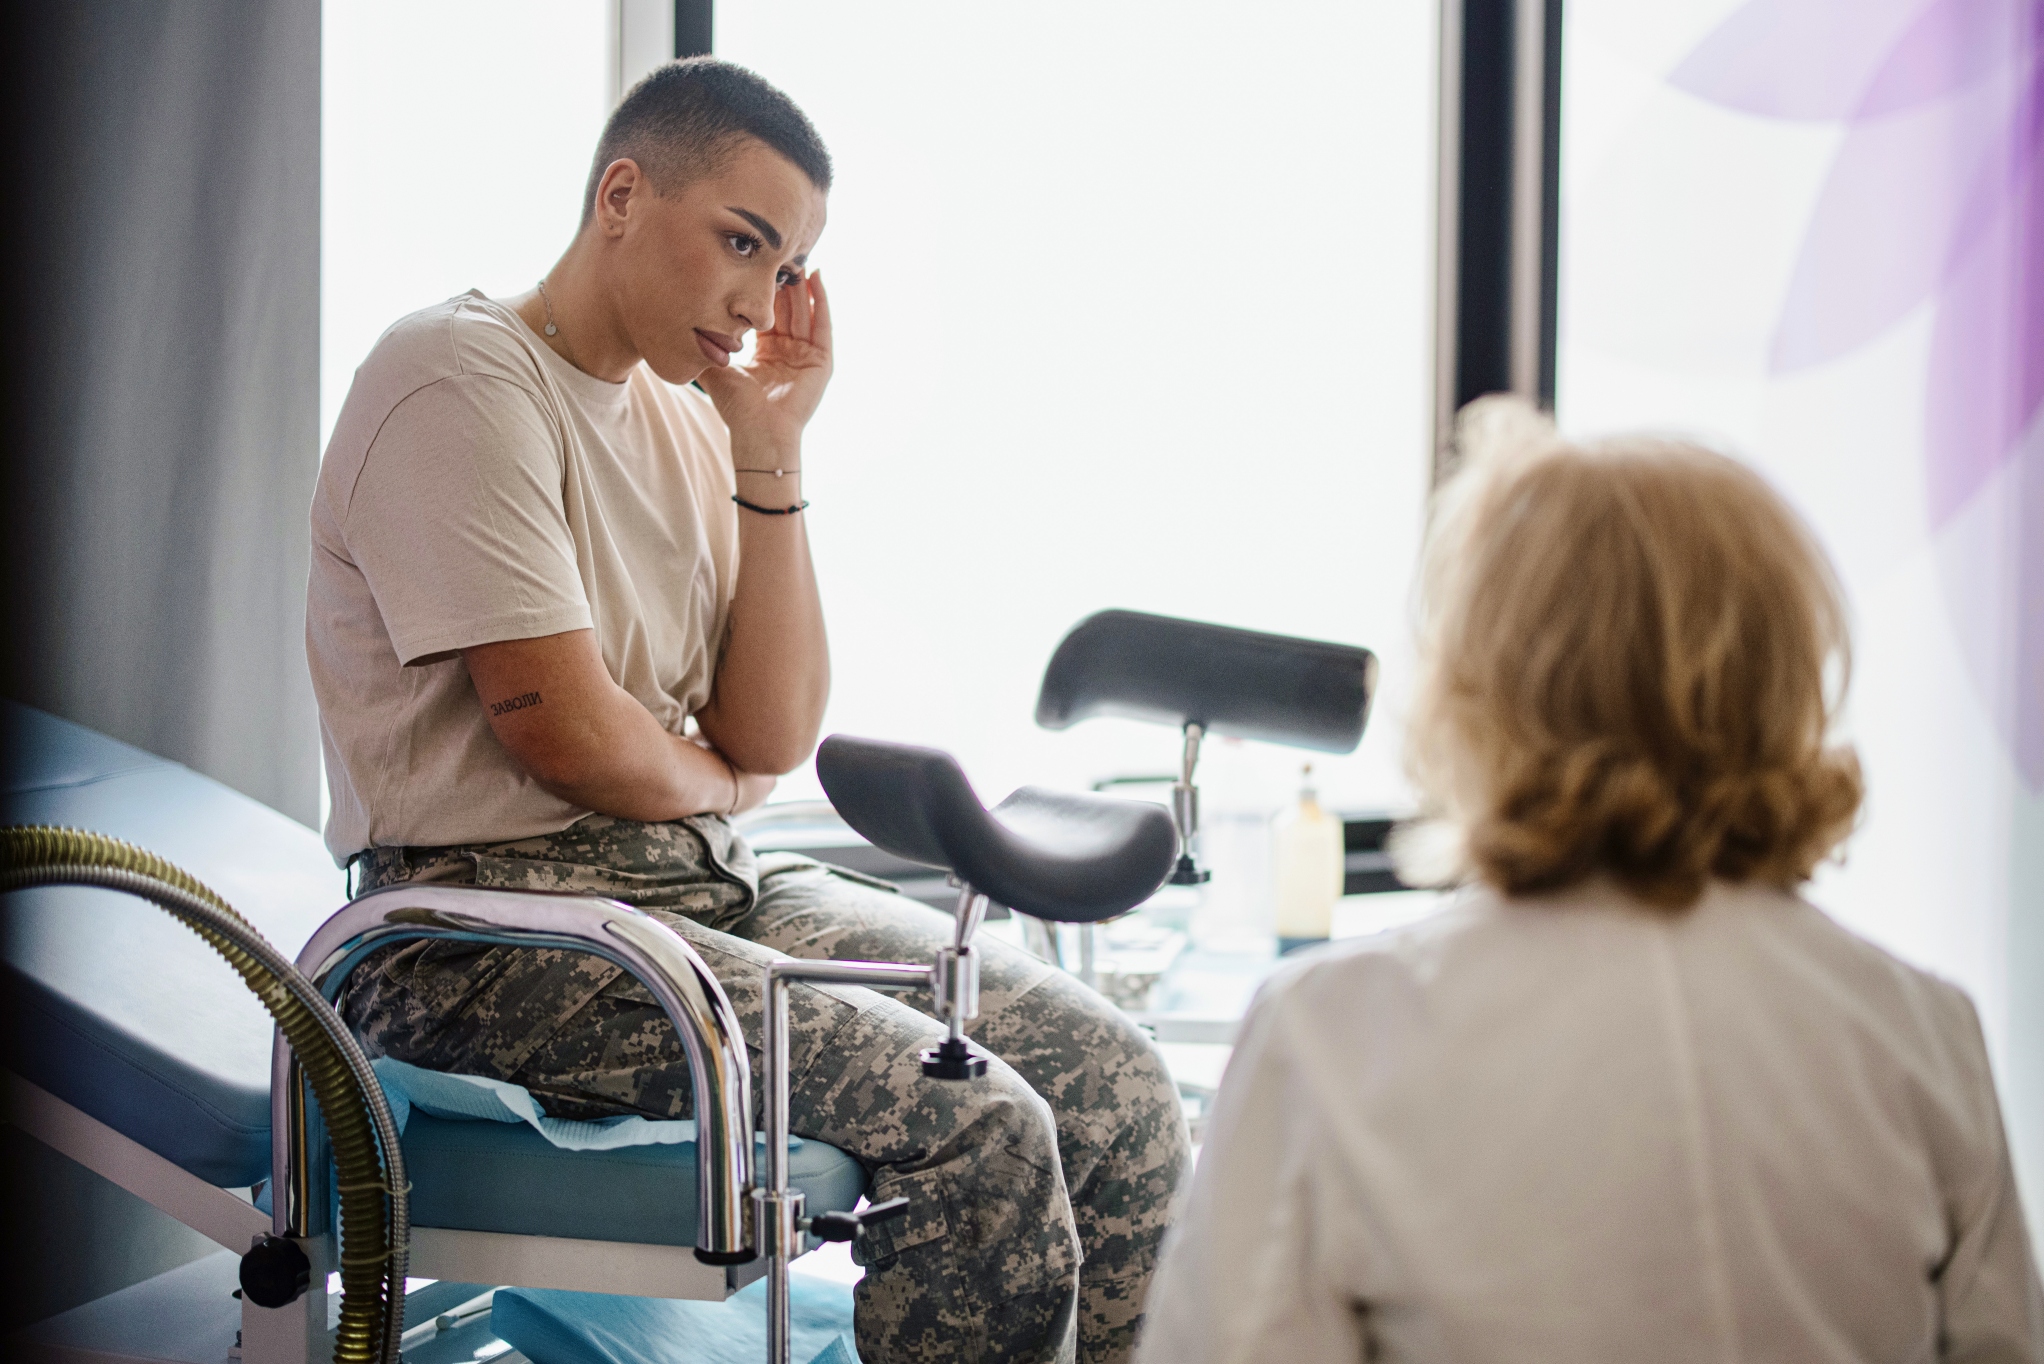 A woman wearing camouflage trousers sitting in a hospital bed, her hand on her cheek, talking to a doctor